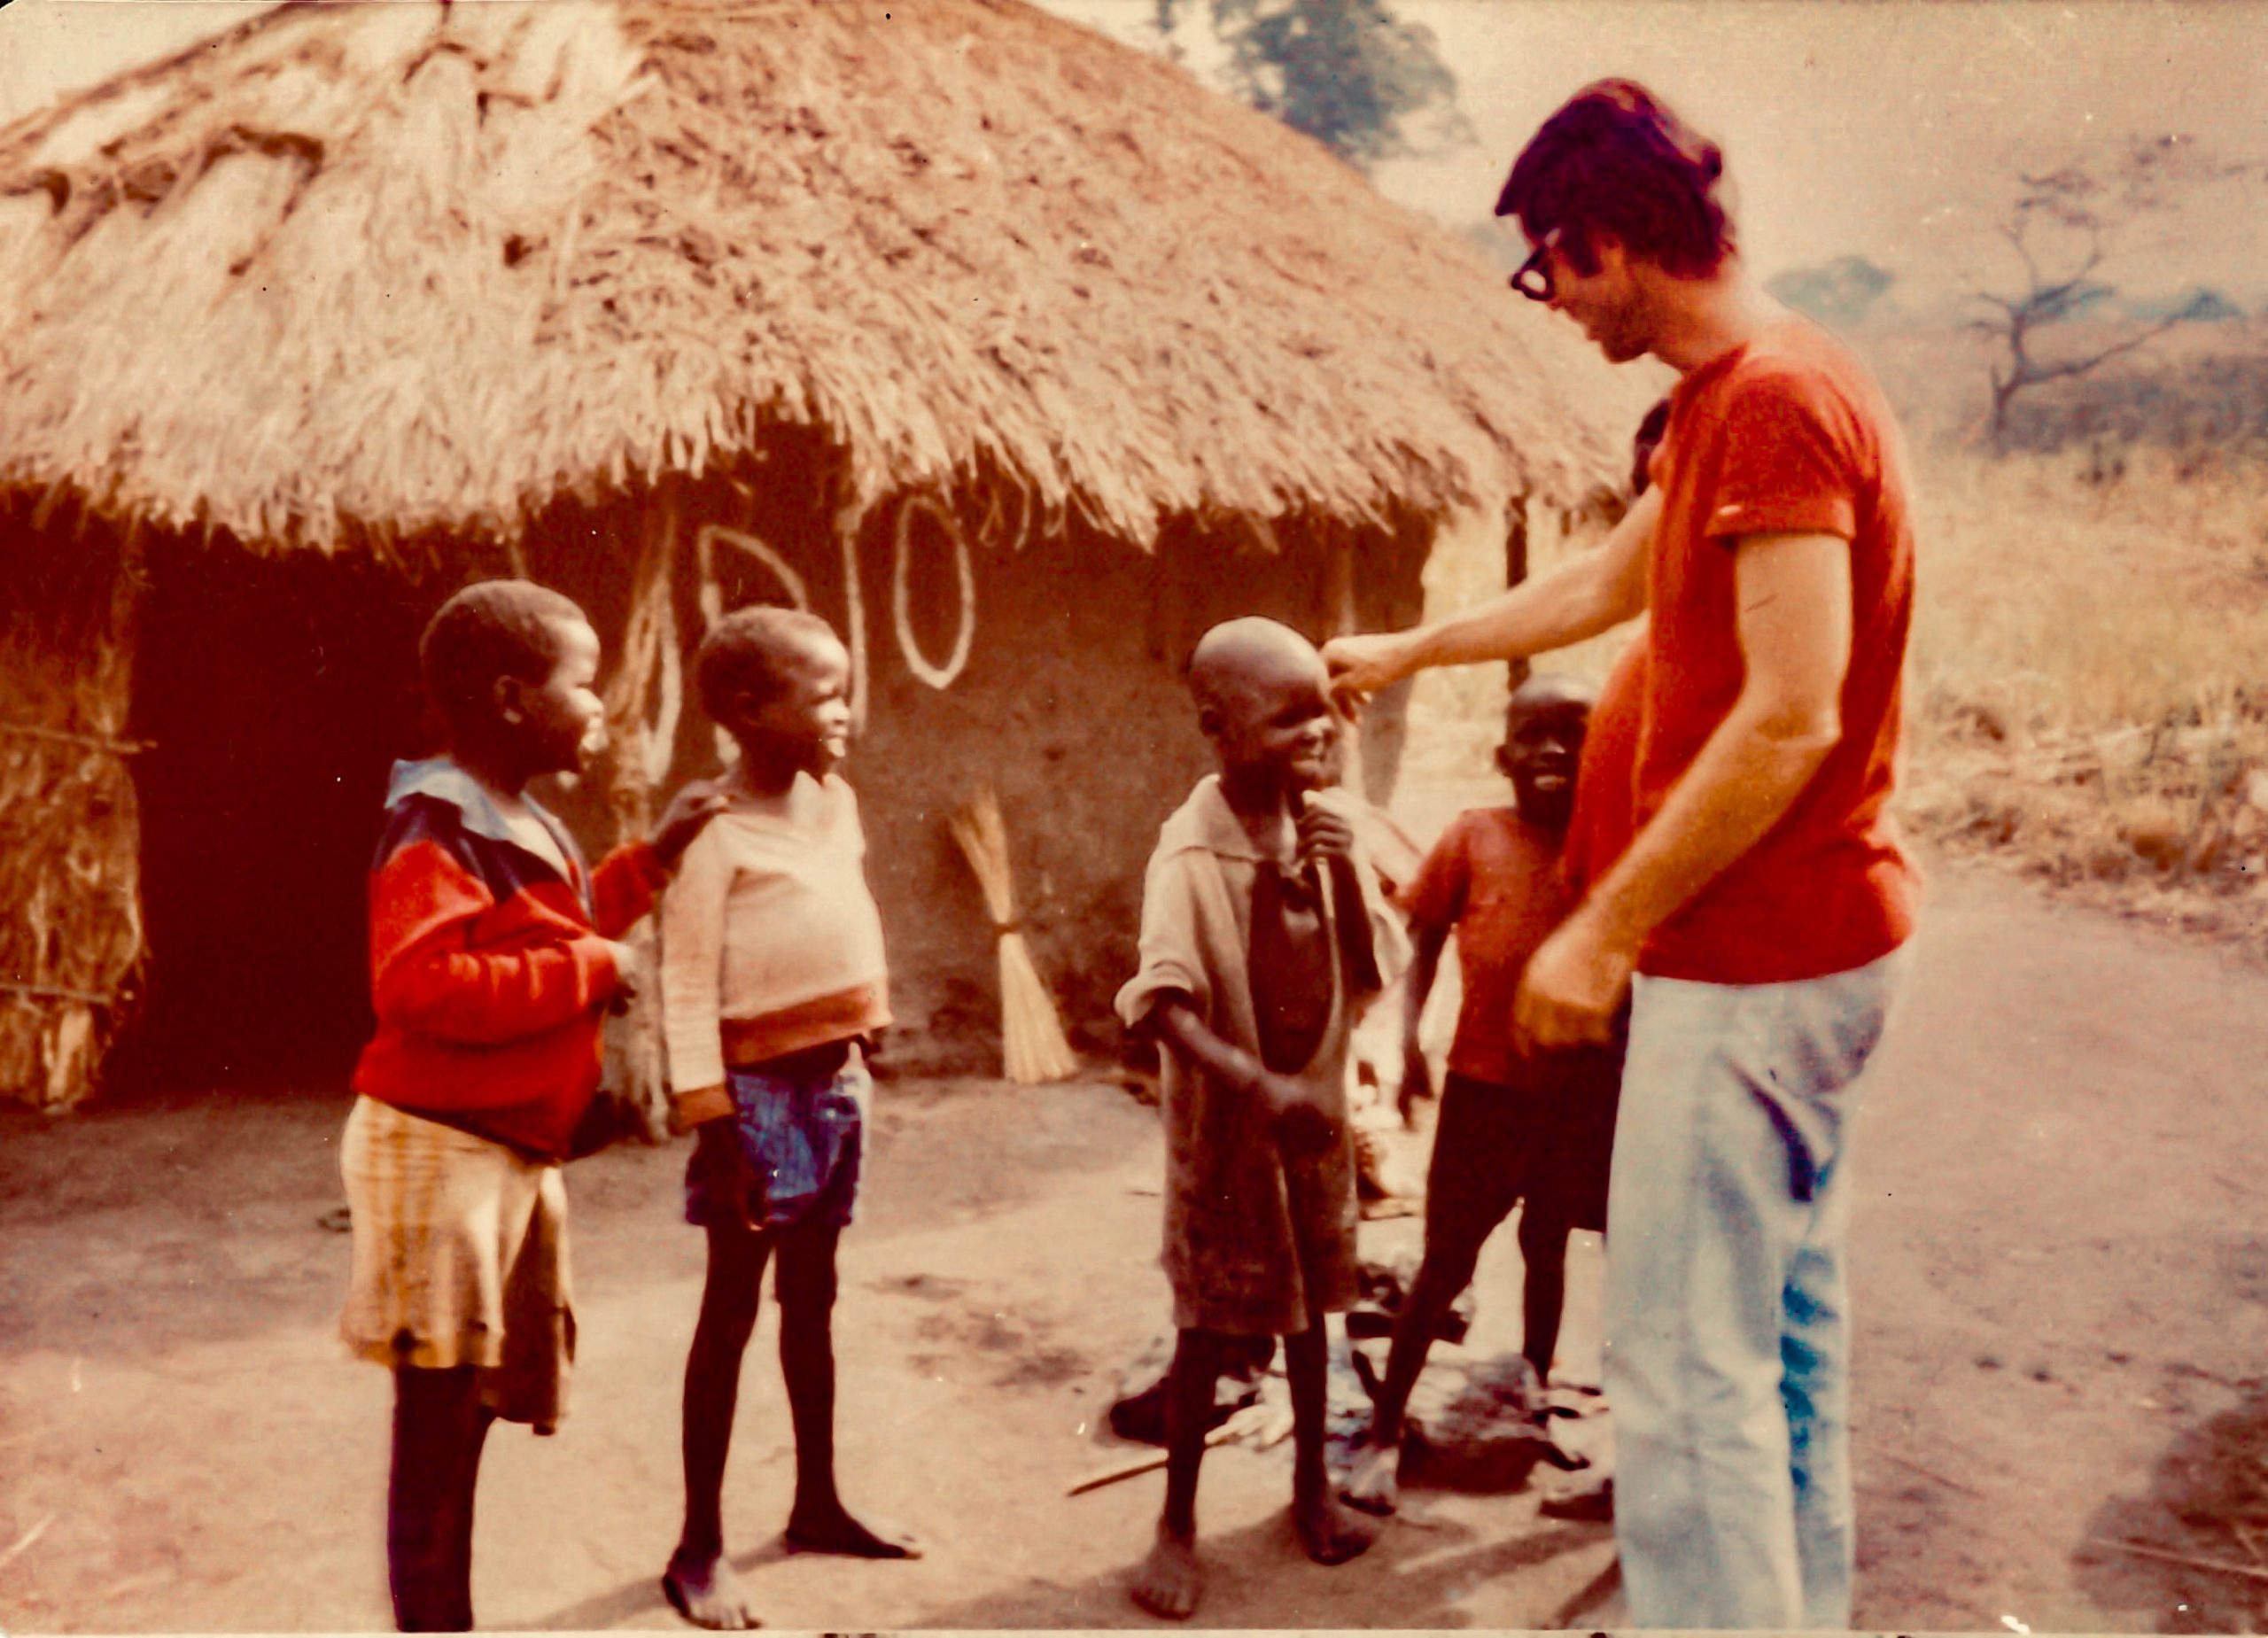 Fr David wears a bright red shirt and jeans. facing away from the camera he is blessing a young African child. Several African children stand in front of a traditional thatch roof house.